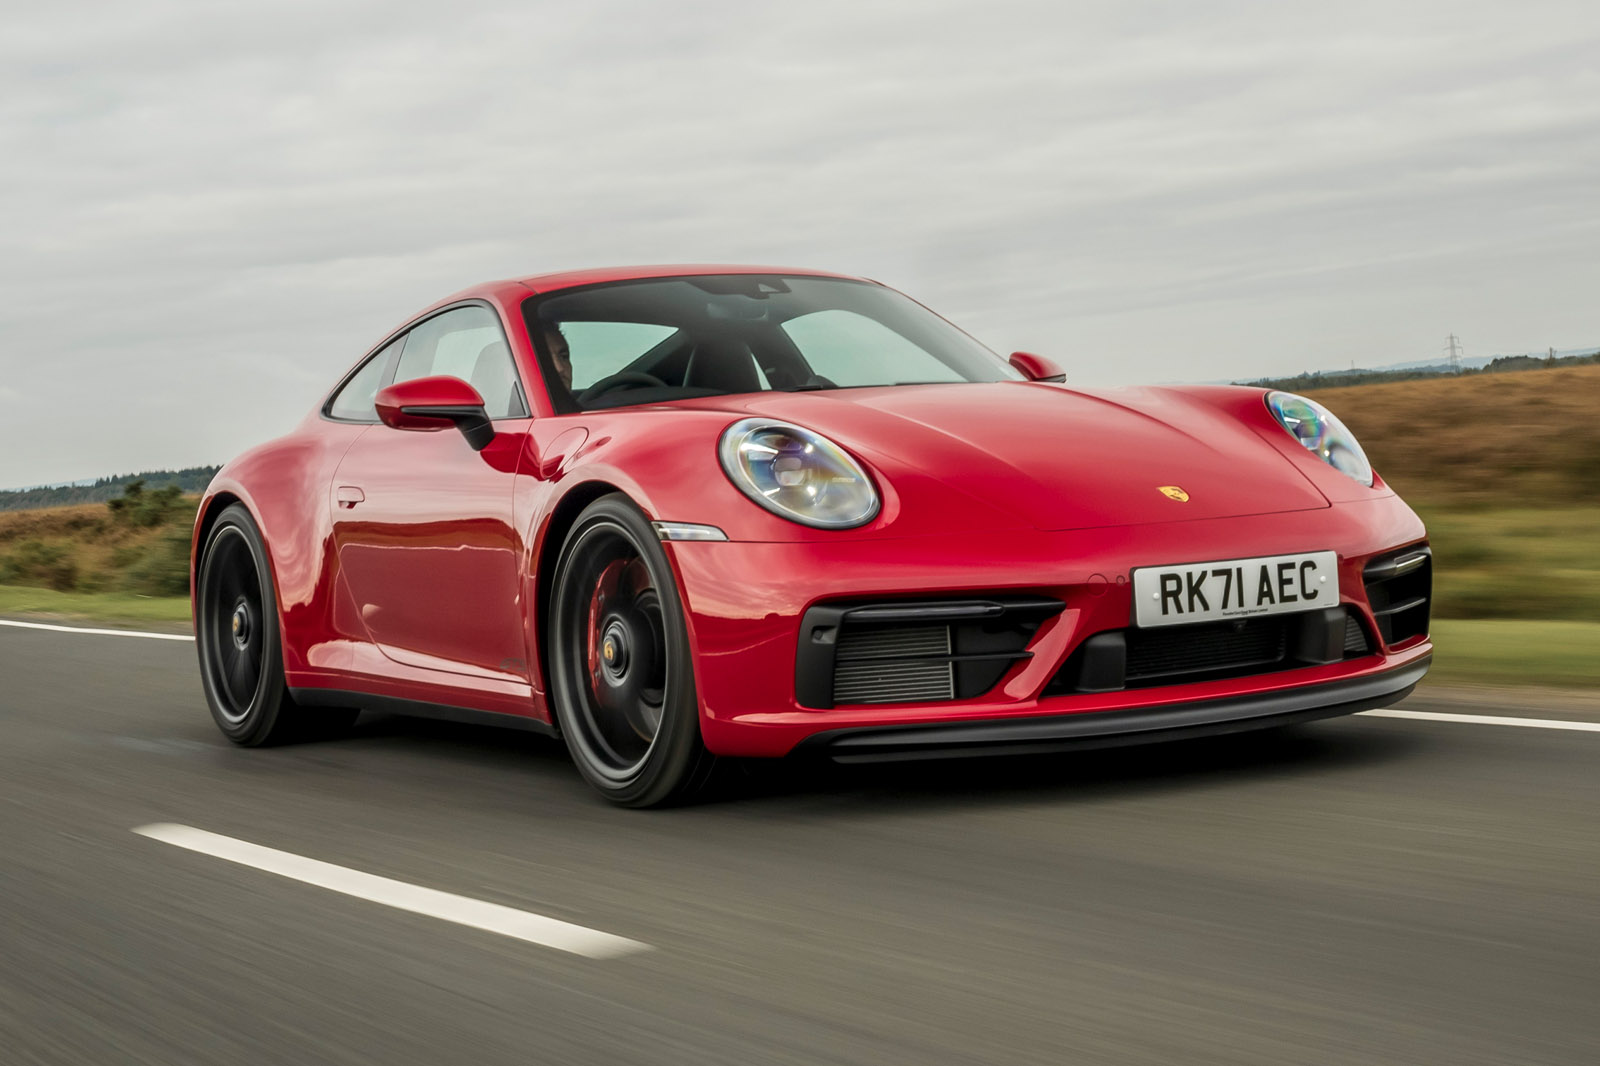 2022 Porsche 911 Turbo S Review: Lightweight Package Is Cool but